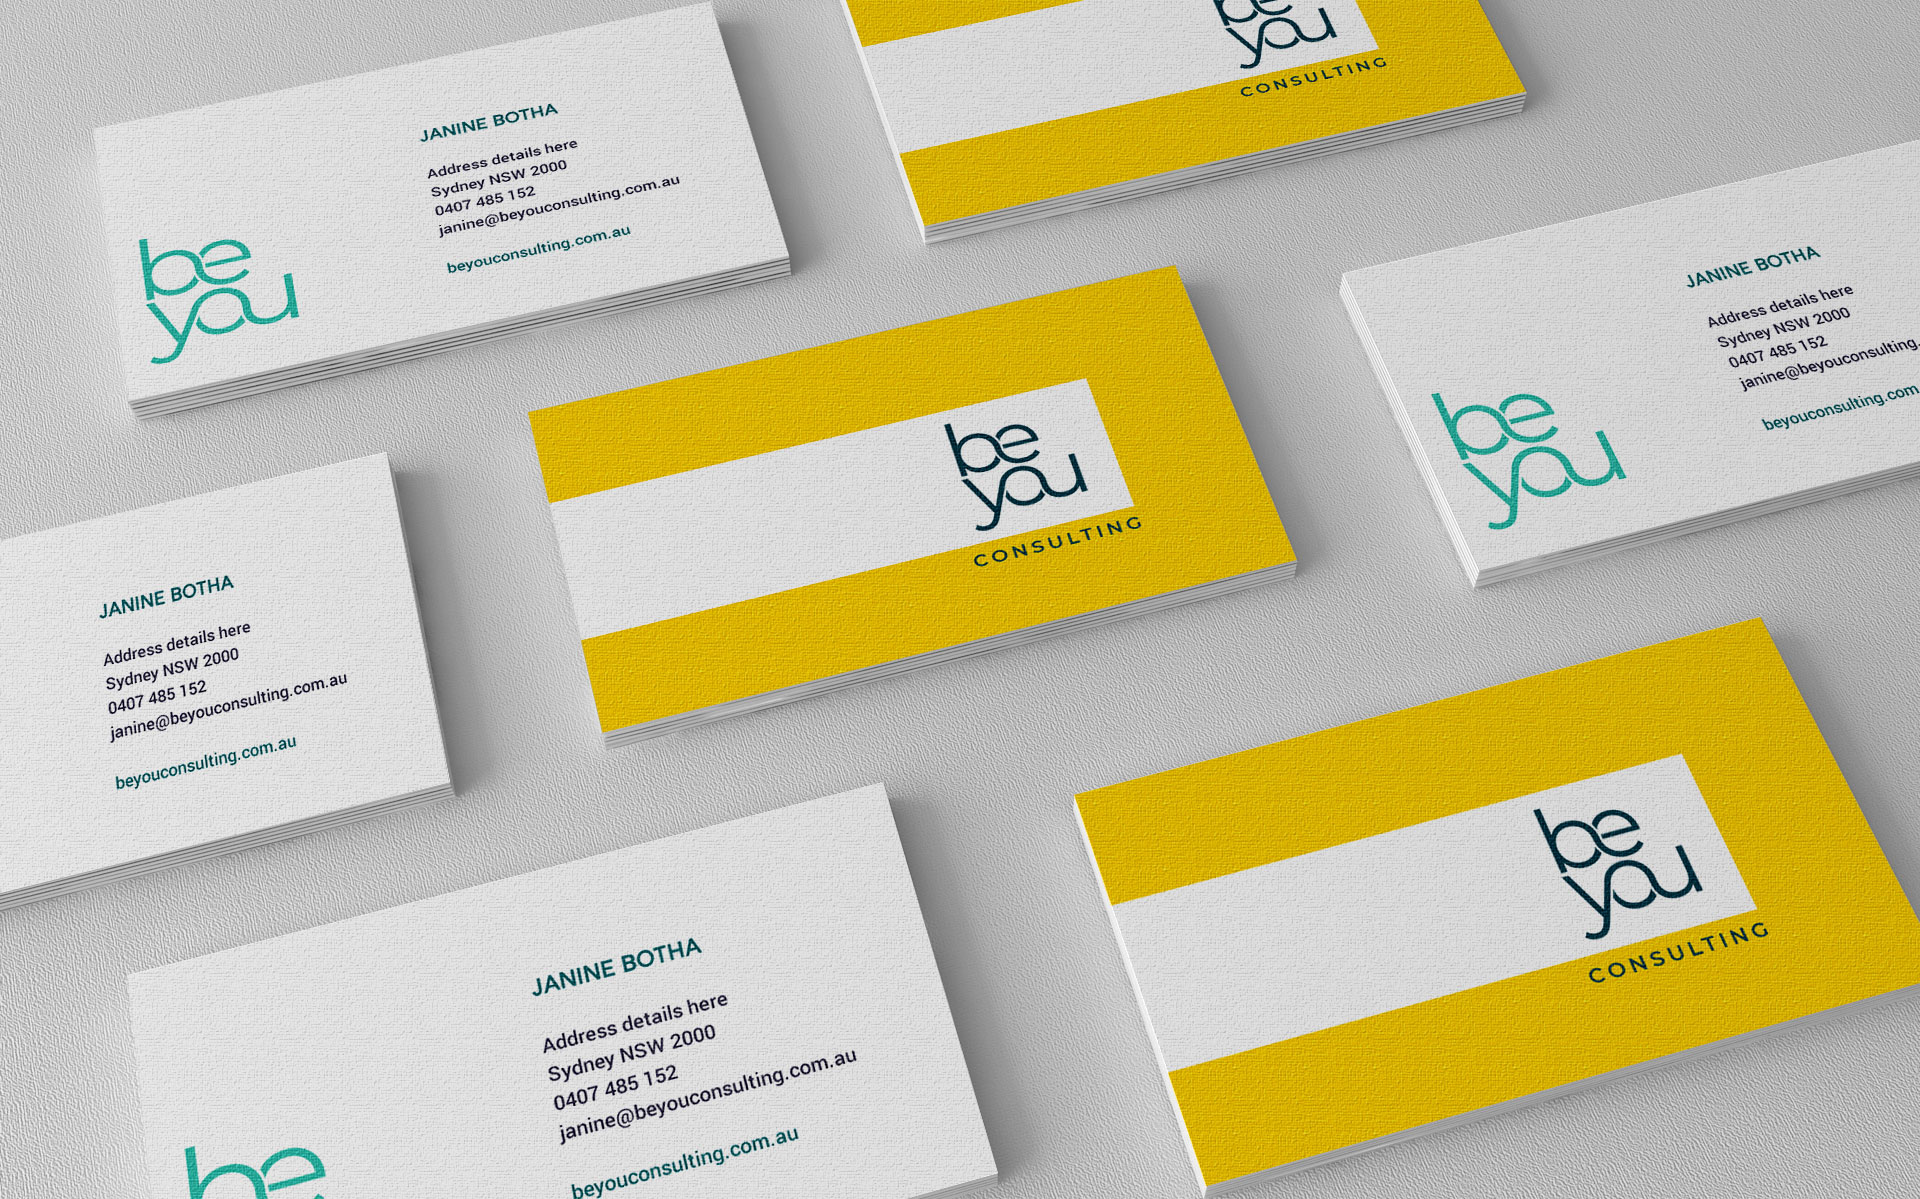 Be You Consulting logo, branding & marketing items designed by Amy at Yellow Sunday